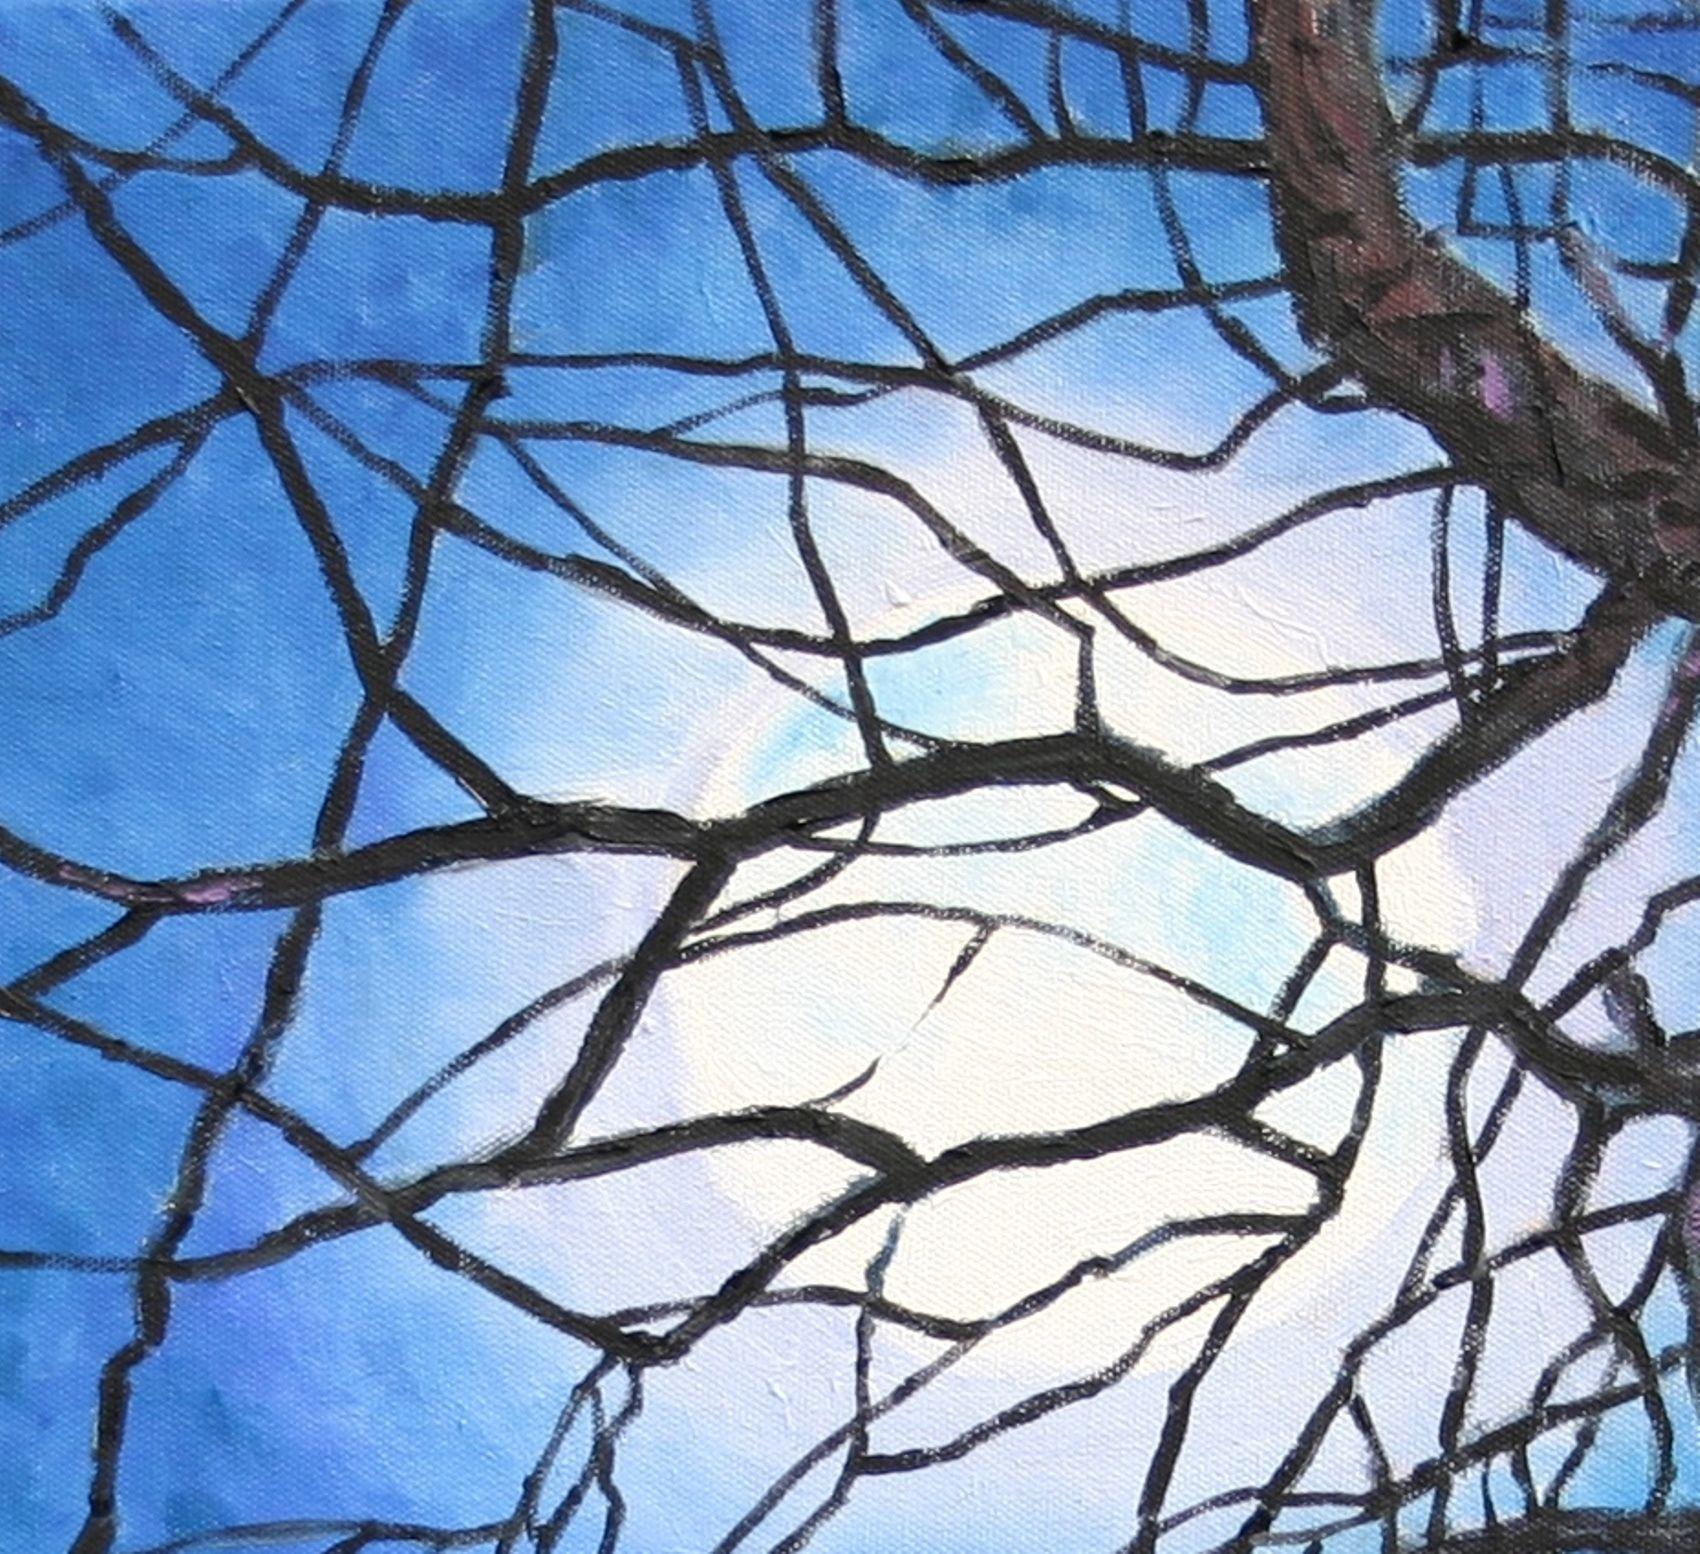 Contemporary Impressionism    Moon through trees at dusk. This unusual oil painting was inspired by the artists love of Beethoven's melancholy masterpiece 'Moonlight Sonata.'  Chunky canvas painted around the edges for an unframed contemporary look.